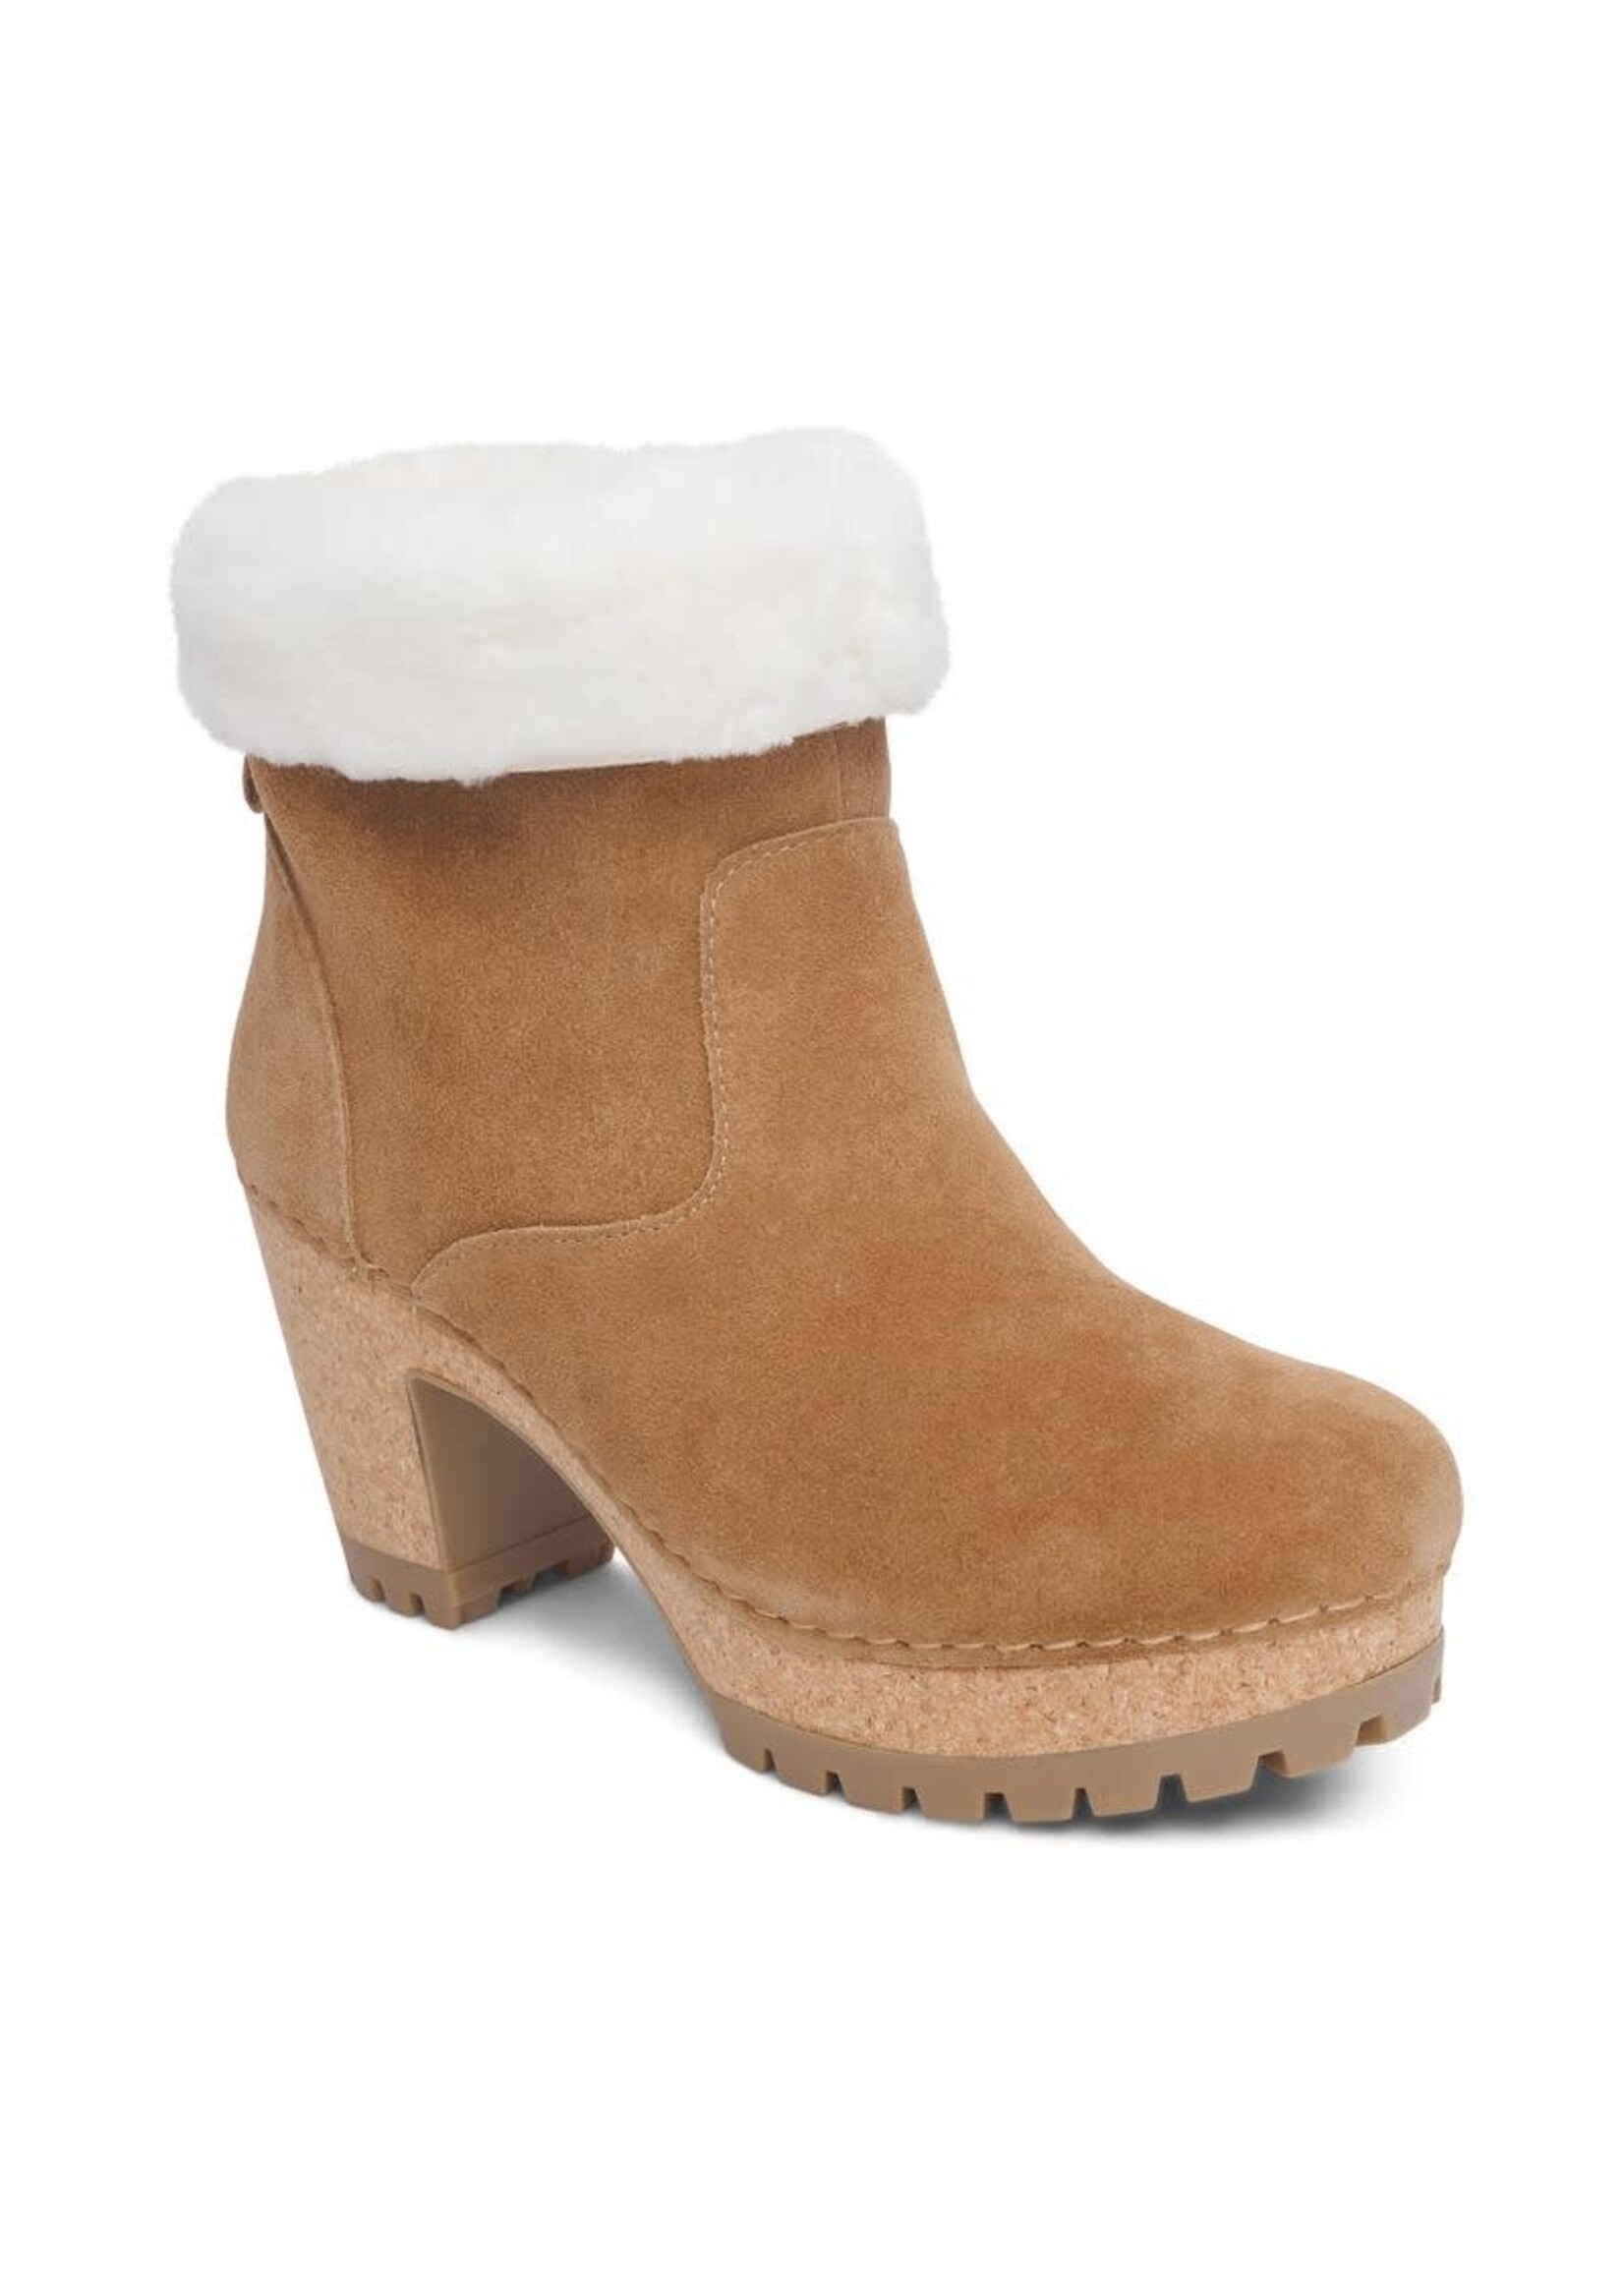 Aetrex Scarlett Cold Weather Boots in Honey Suede by Aetrex Water Resistant